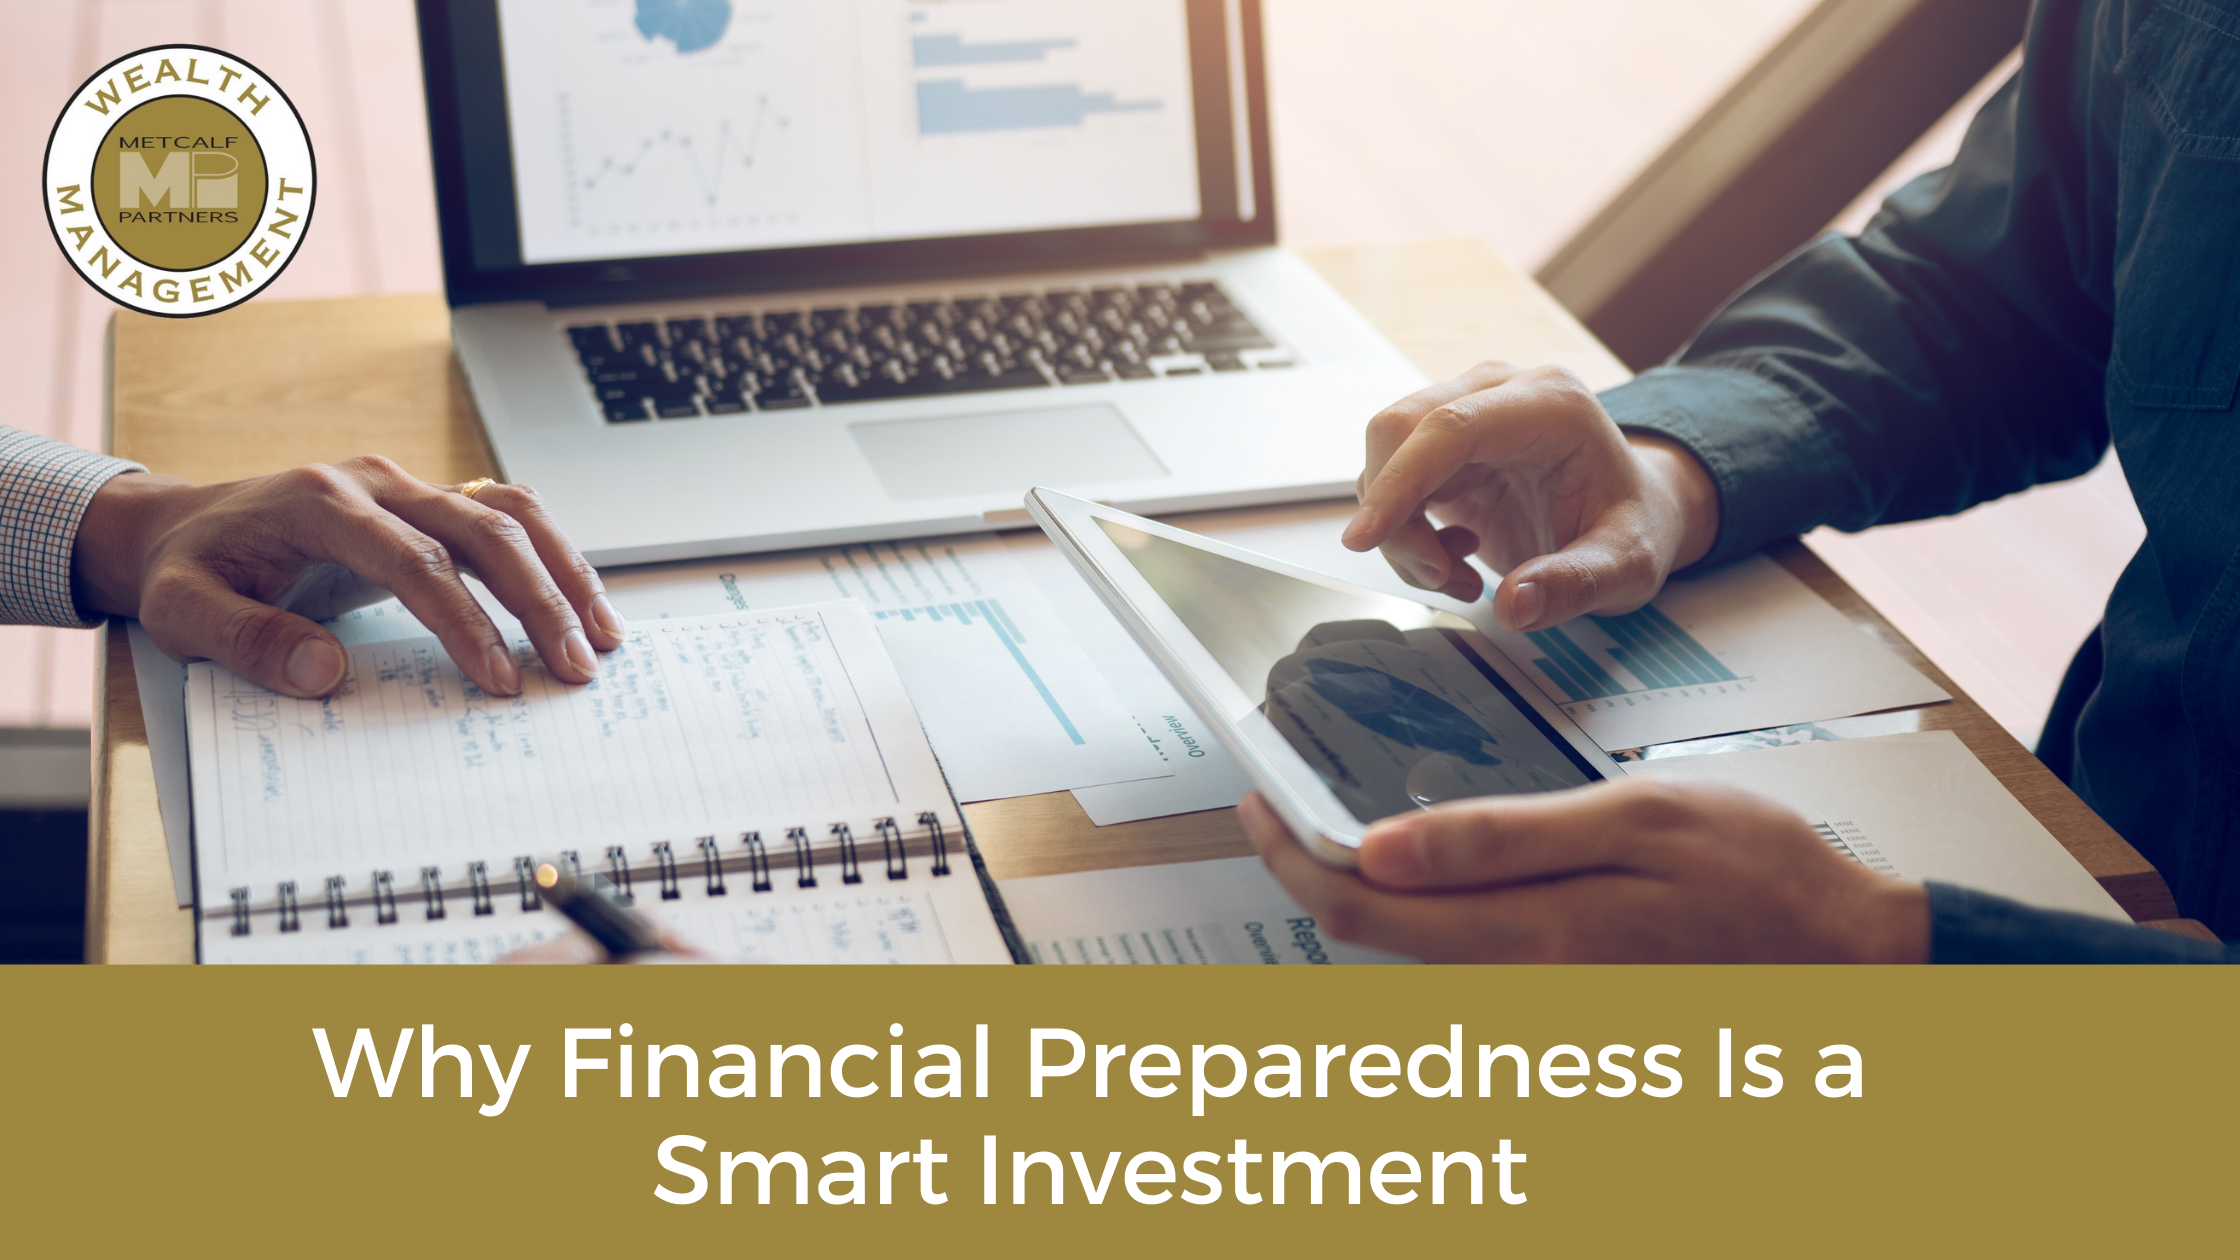 Featured image for “Why Financial Preparedness Is a Smart Investment”